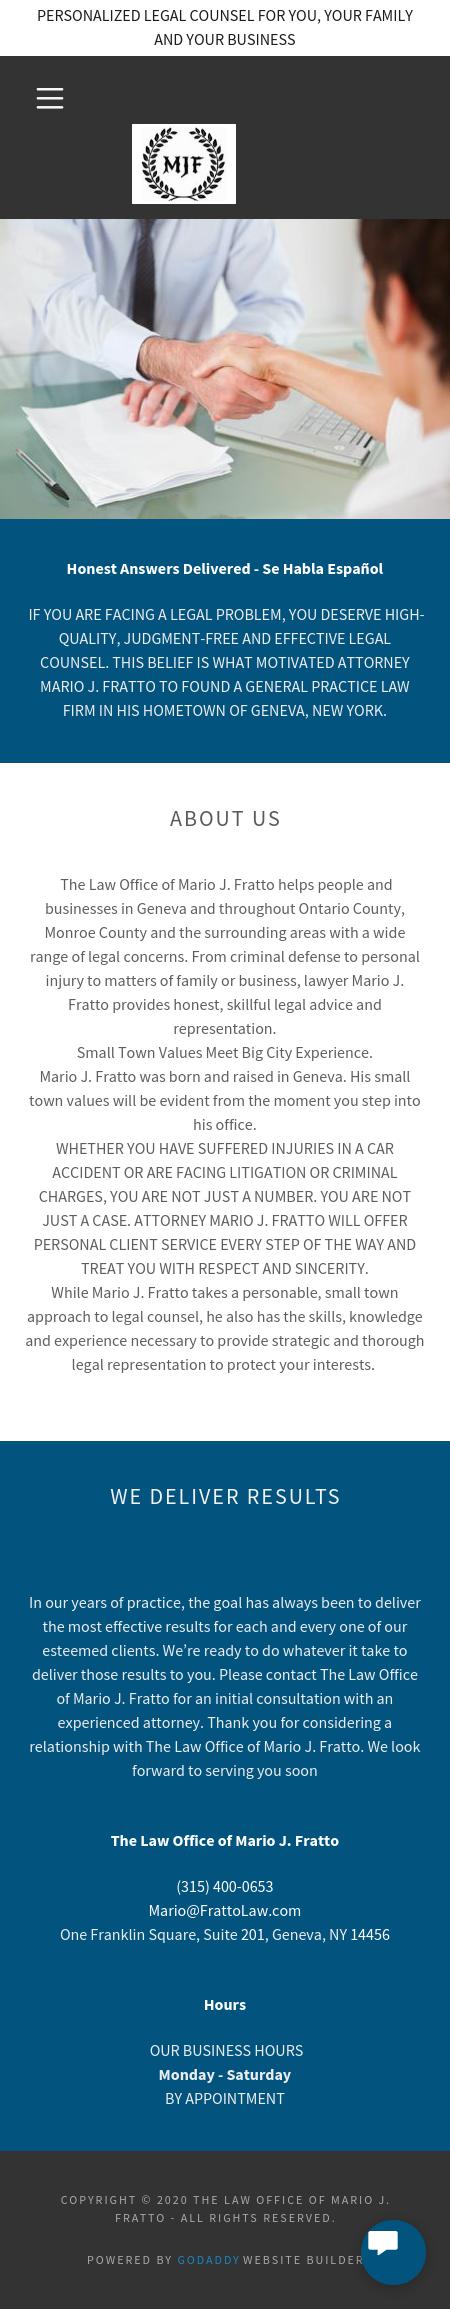 The Law Office of Mario J. Fratto - Rochester NY Lawyers